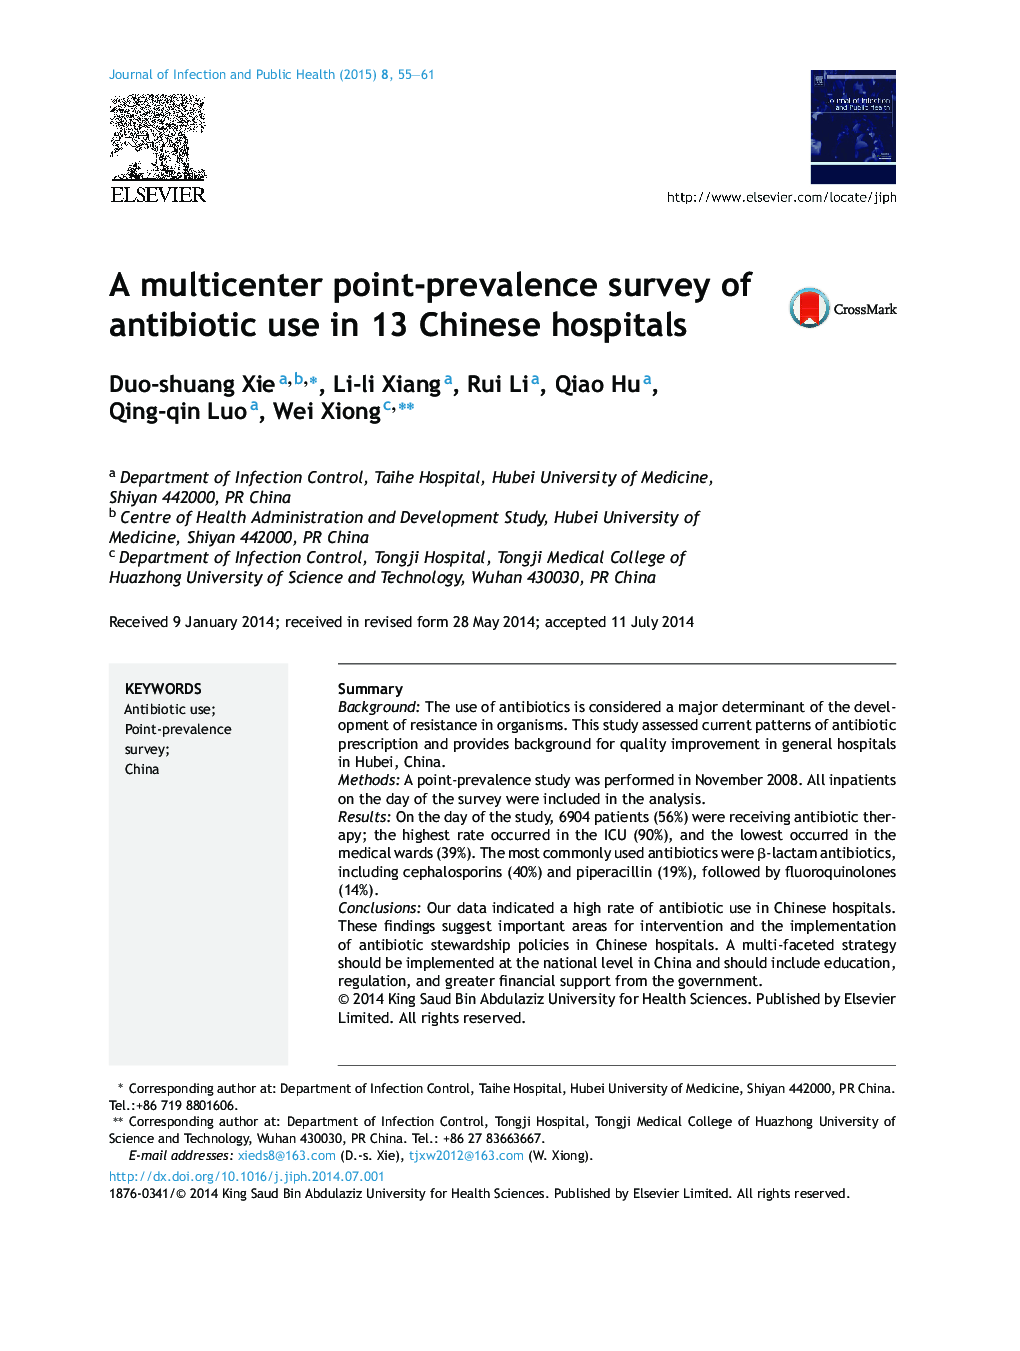 A multicenter point-prevalence survey of antibiotic use in 13 Chinese hospitals